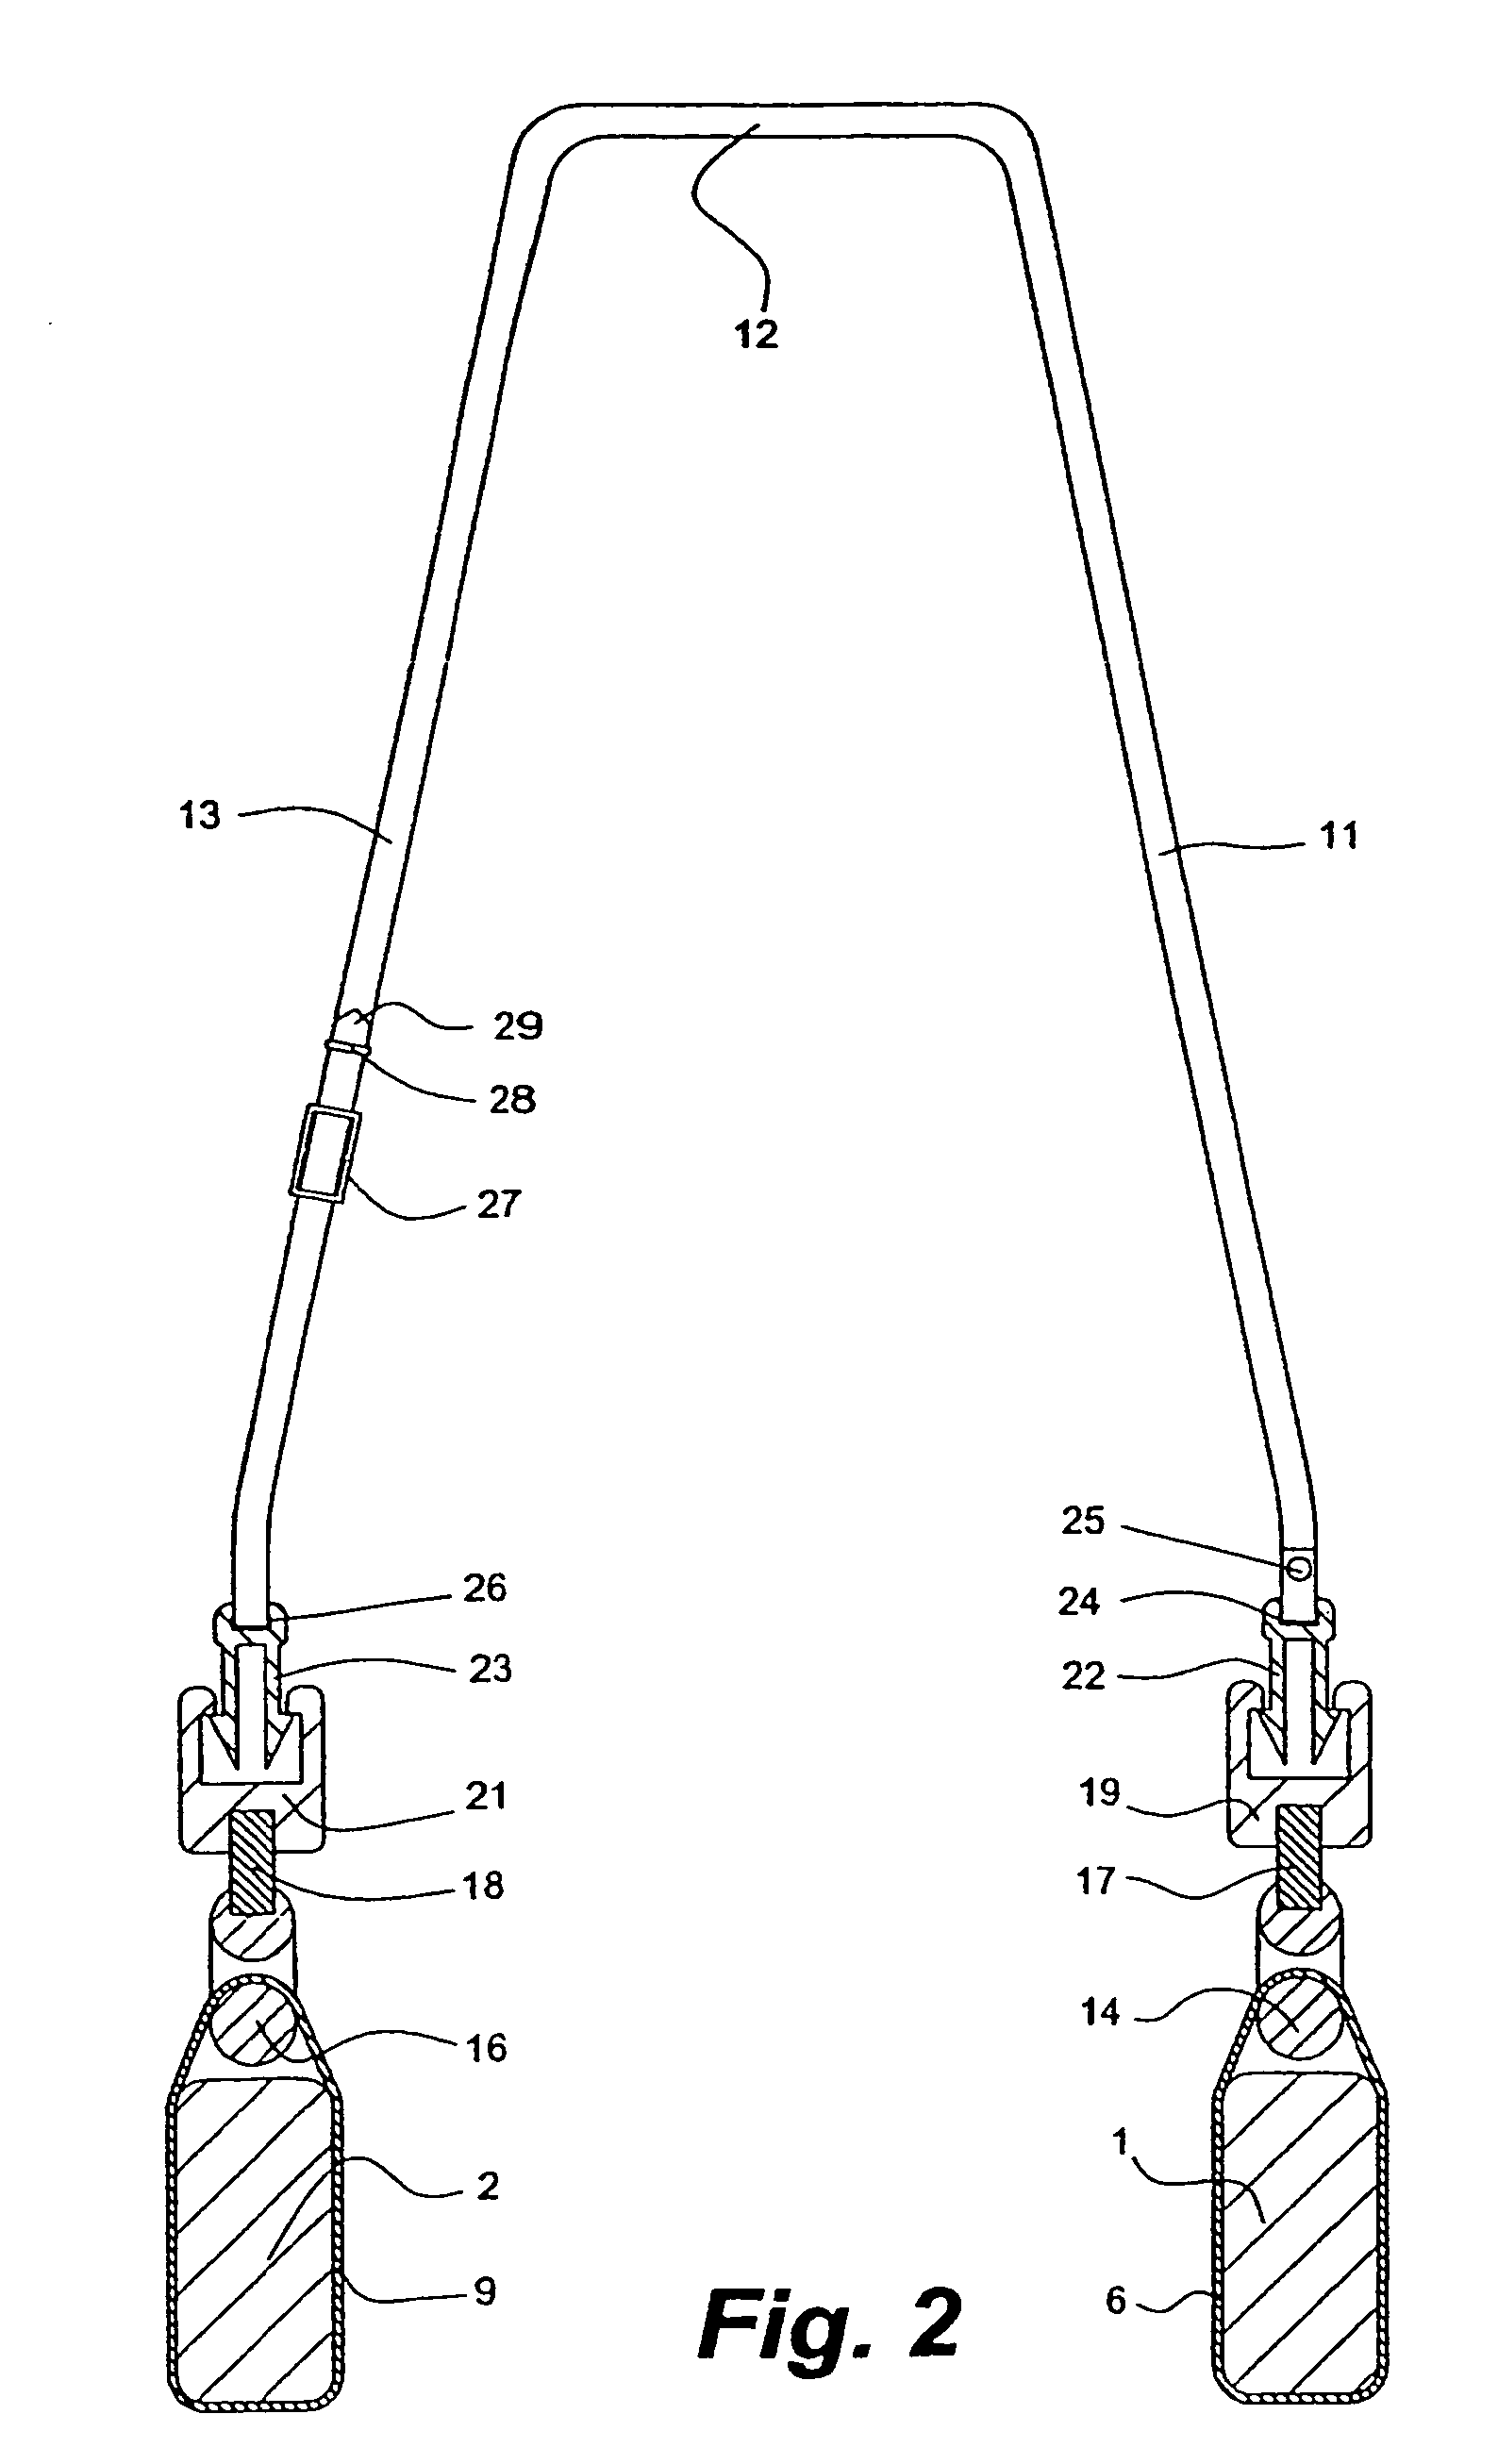 Positioning device for use in apparatus for treating sudden cardiac arrest